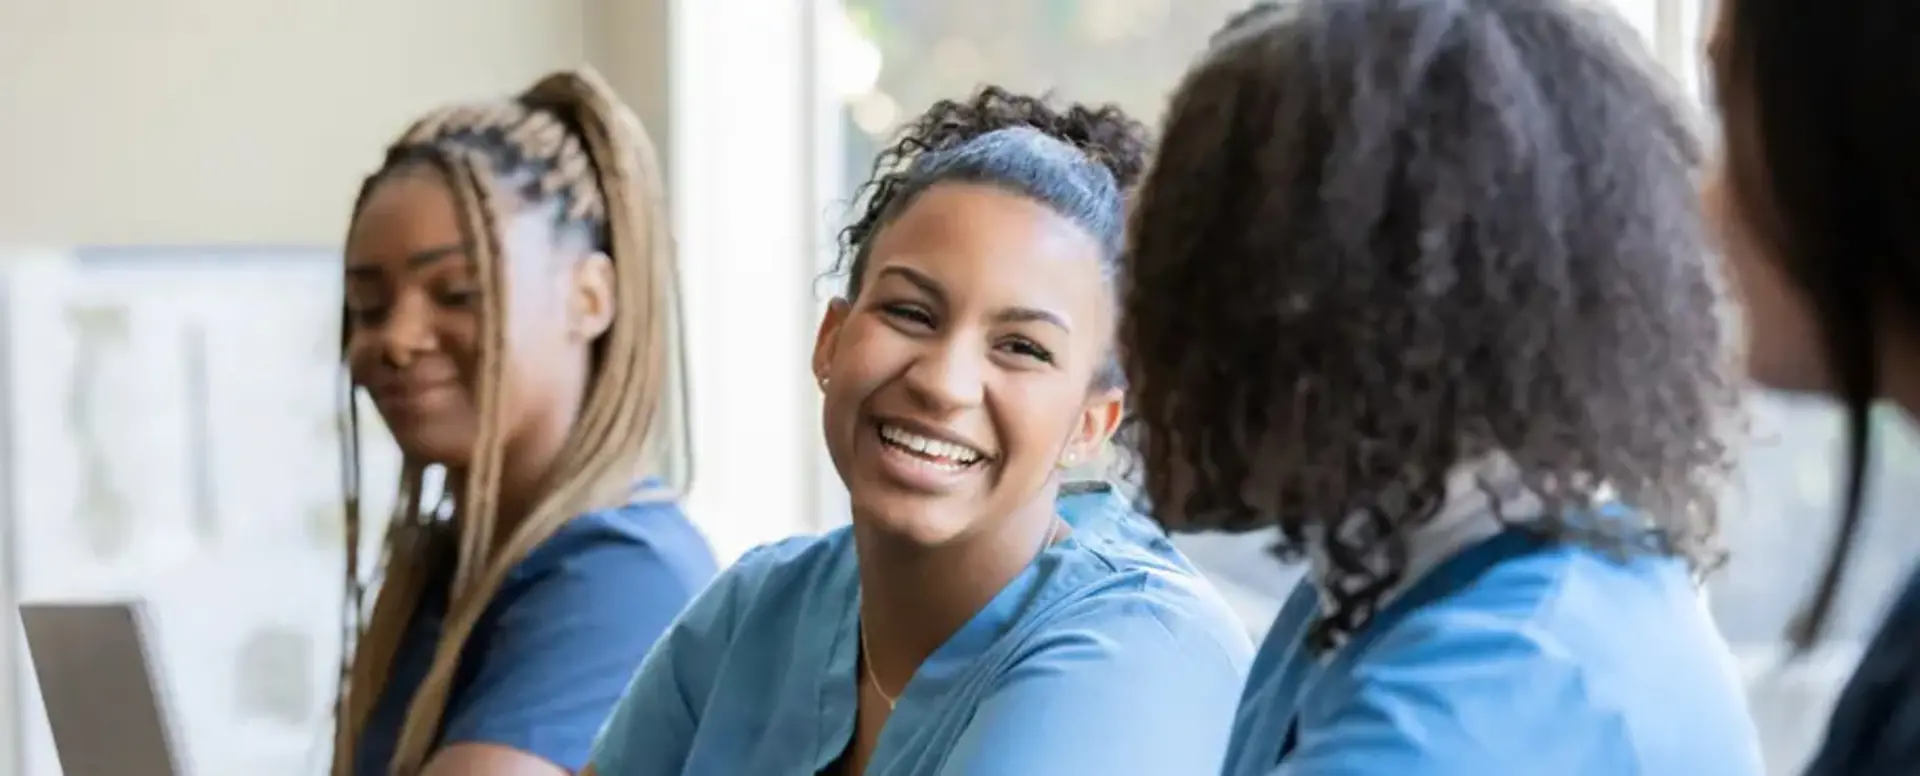 Three health care workers smiling image